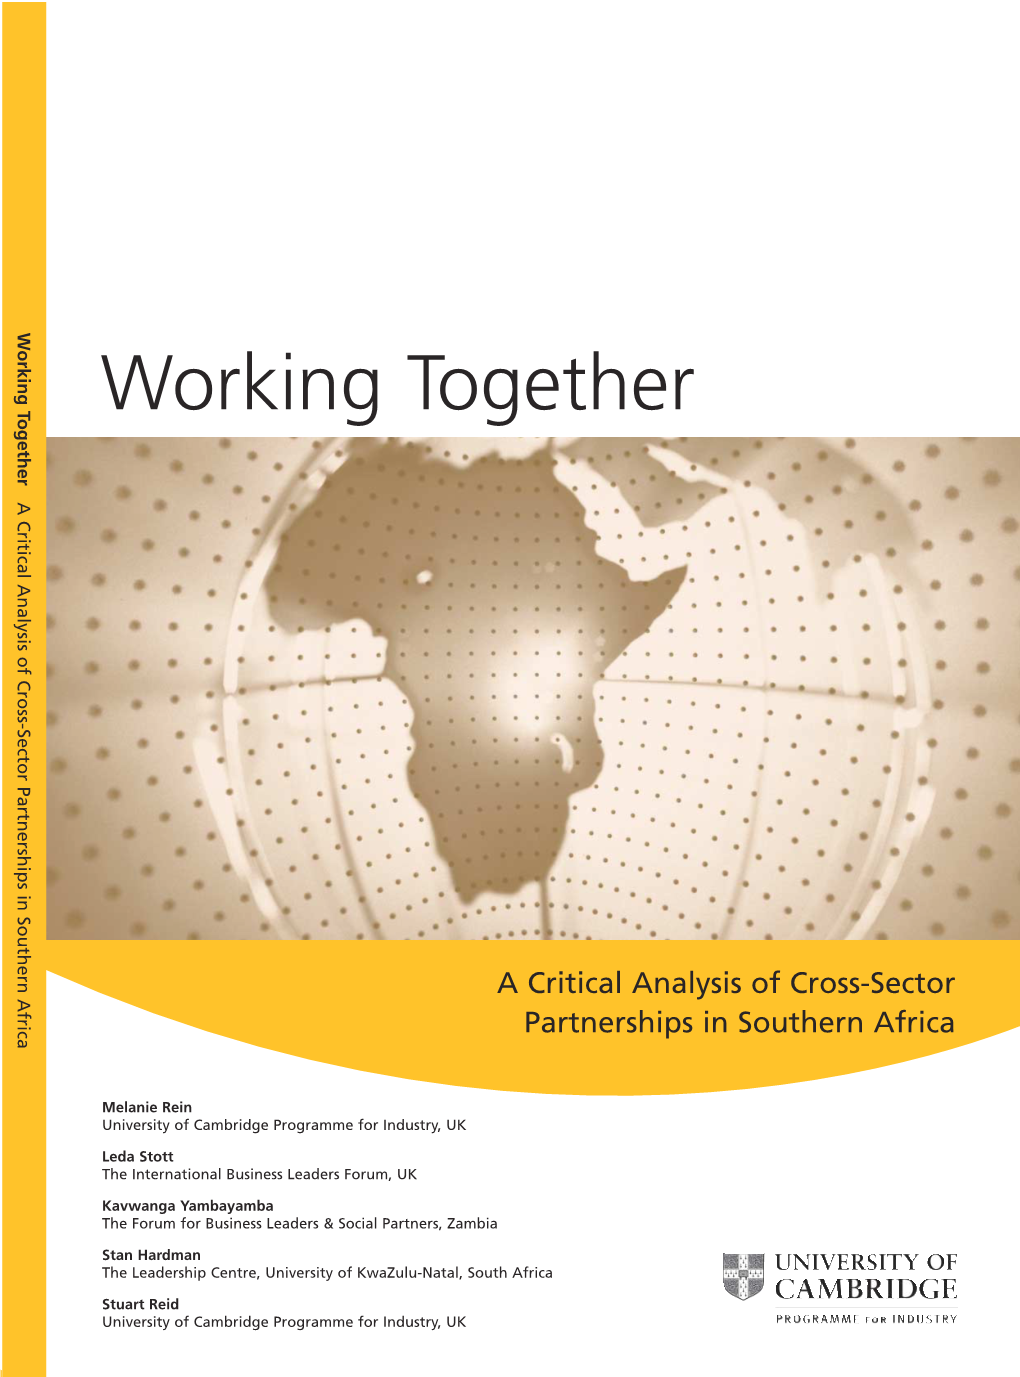 Working Together: a Critical Analysis of Cross-Sector Partnerships in Southern Africa Development, Action Research and the Development of Complex Partnership Projects